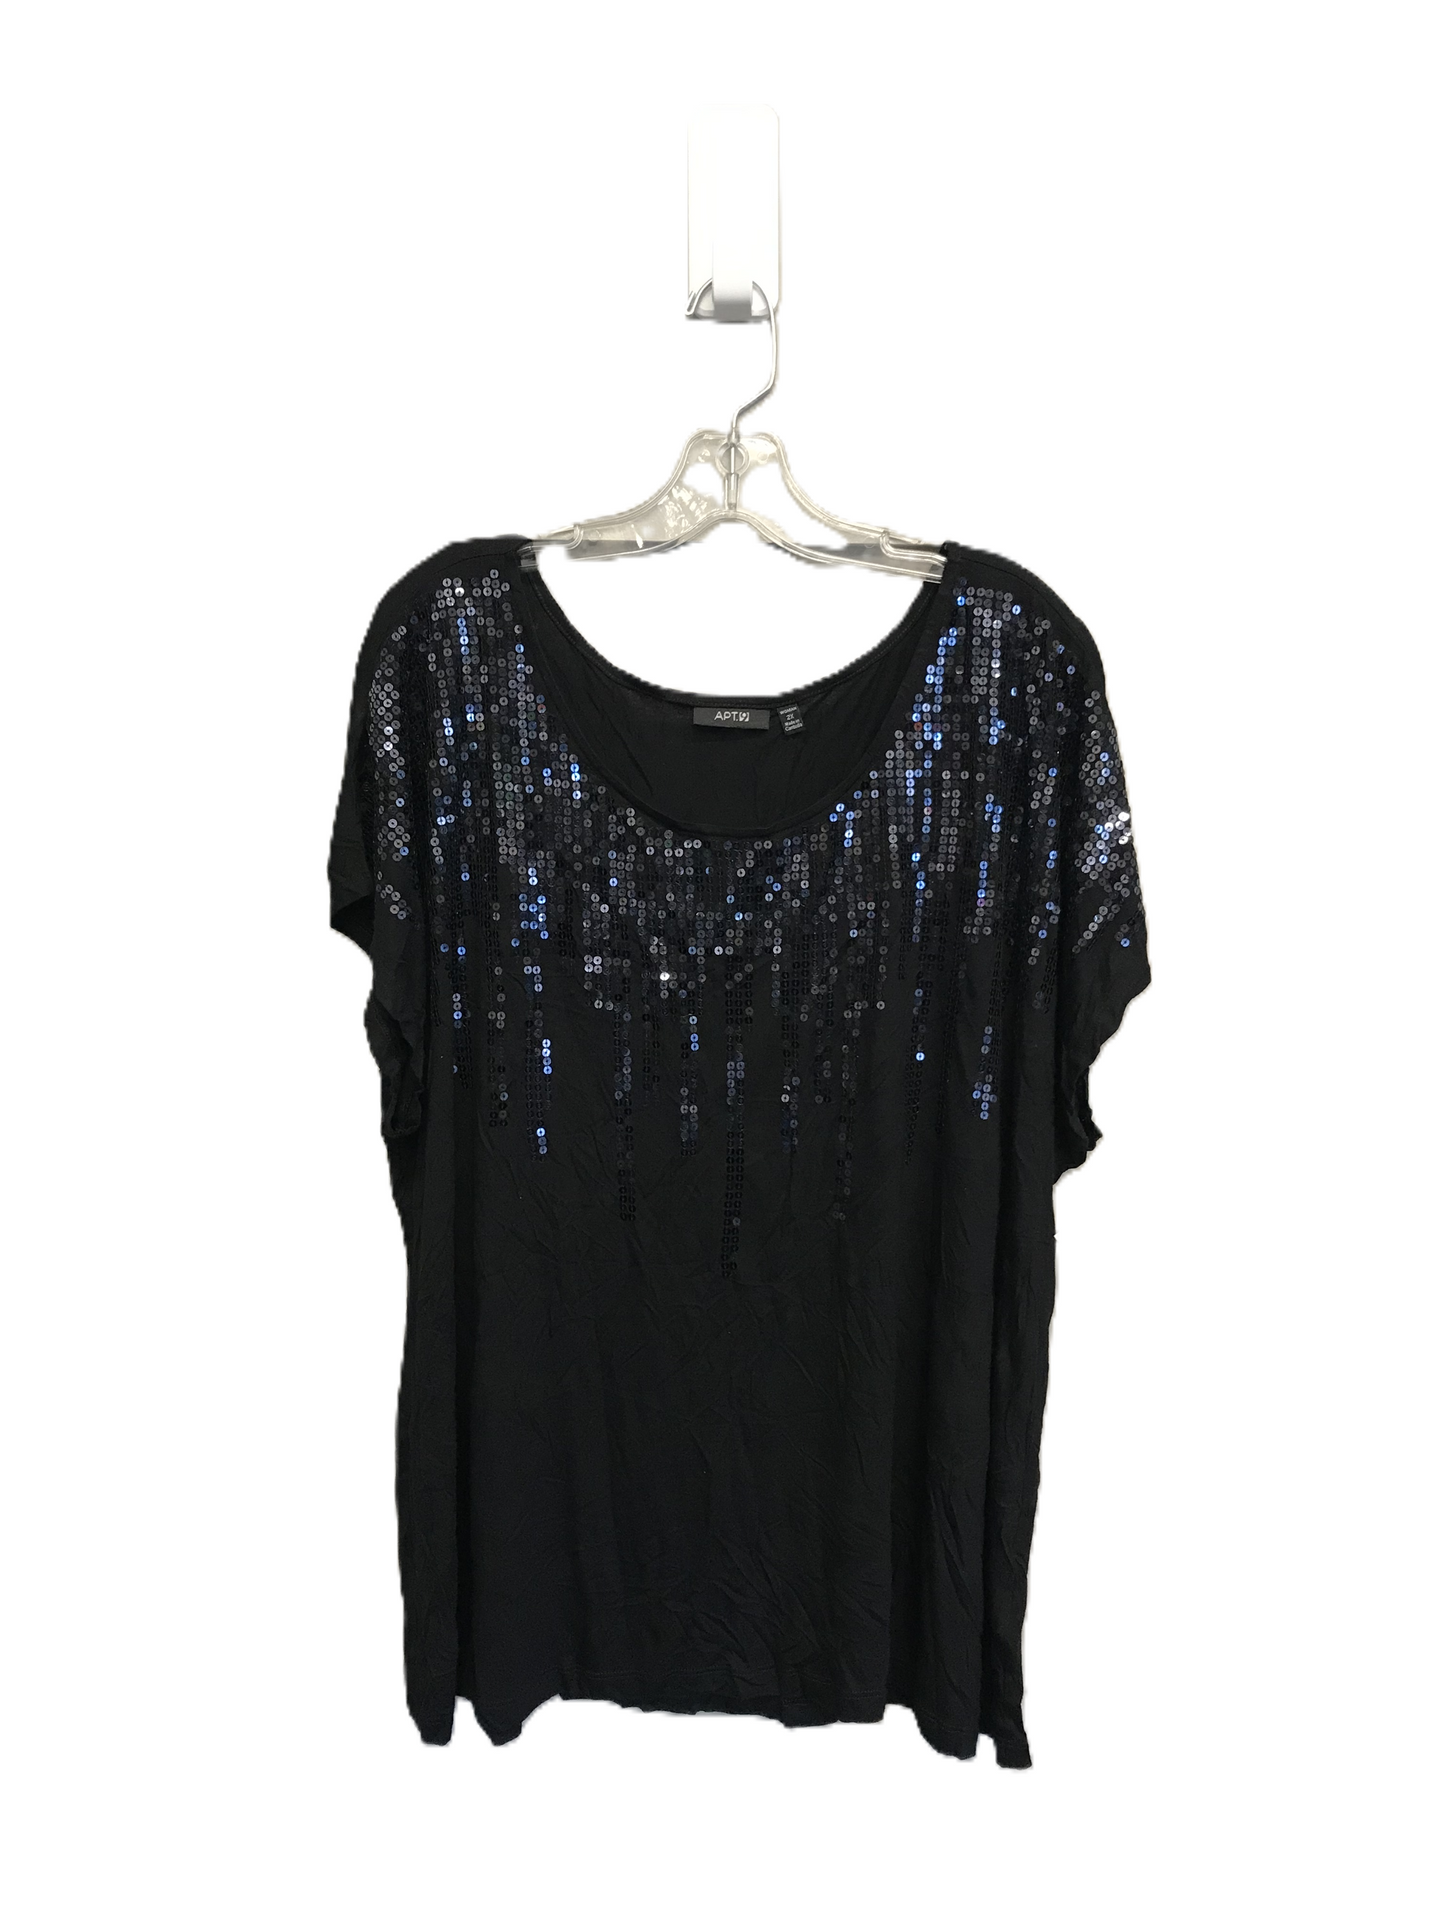 Black Top Short Sleeve By Apt 9, Size: 2x